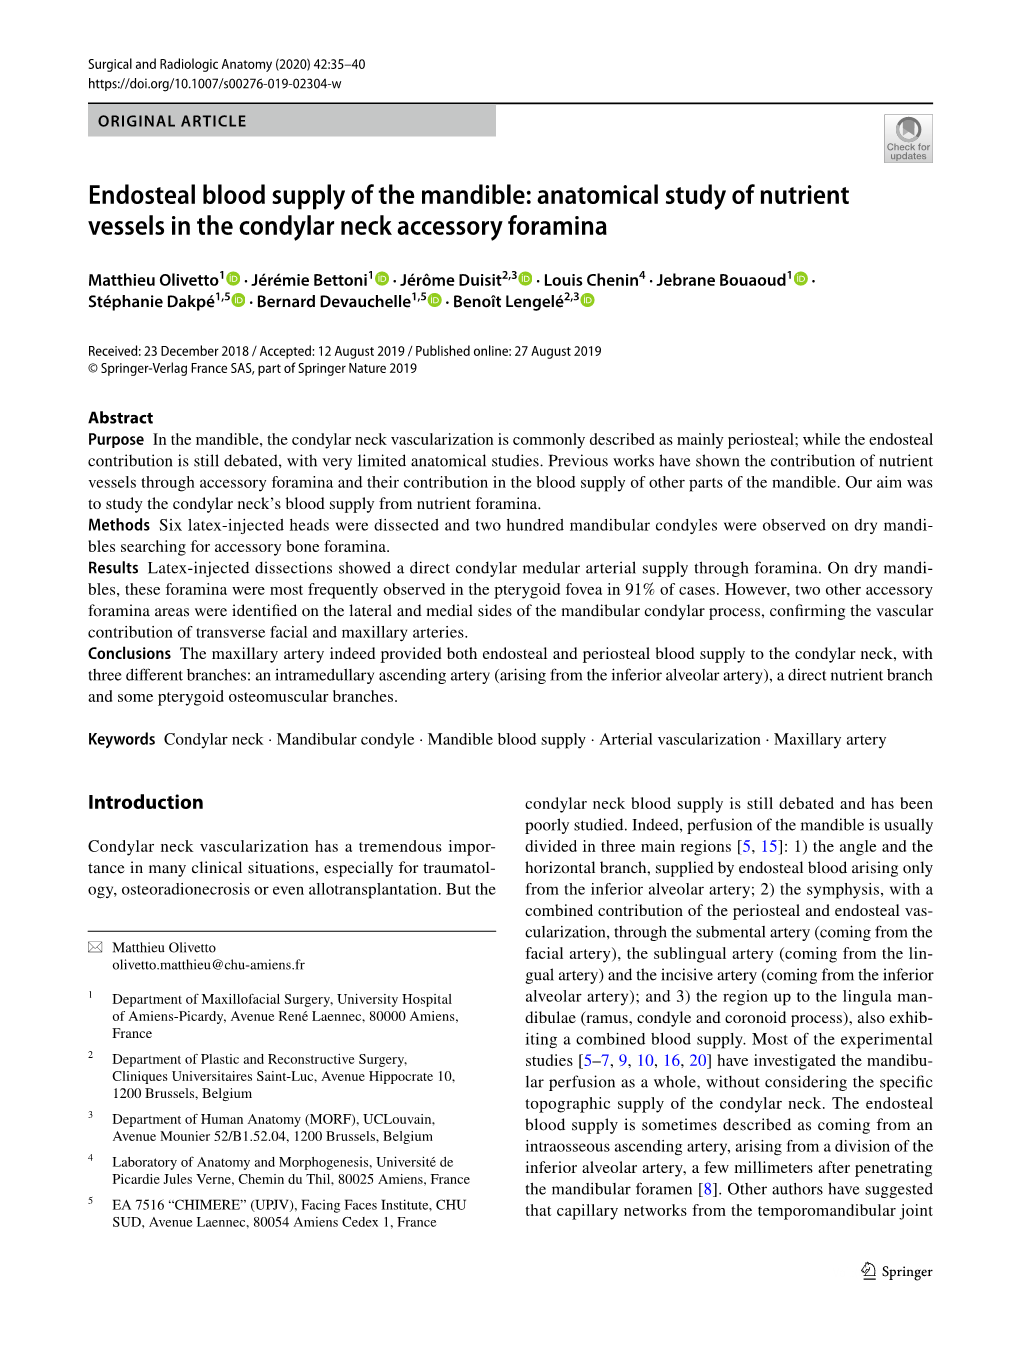 Endosteal Blood Supply of the Mandible: Anatomical Study of Nutrient Vessels in the Condylar Neck Accessory Foramina